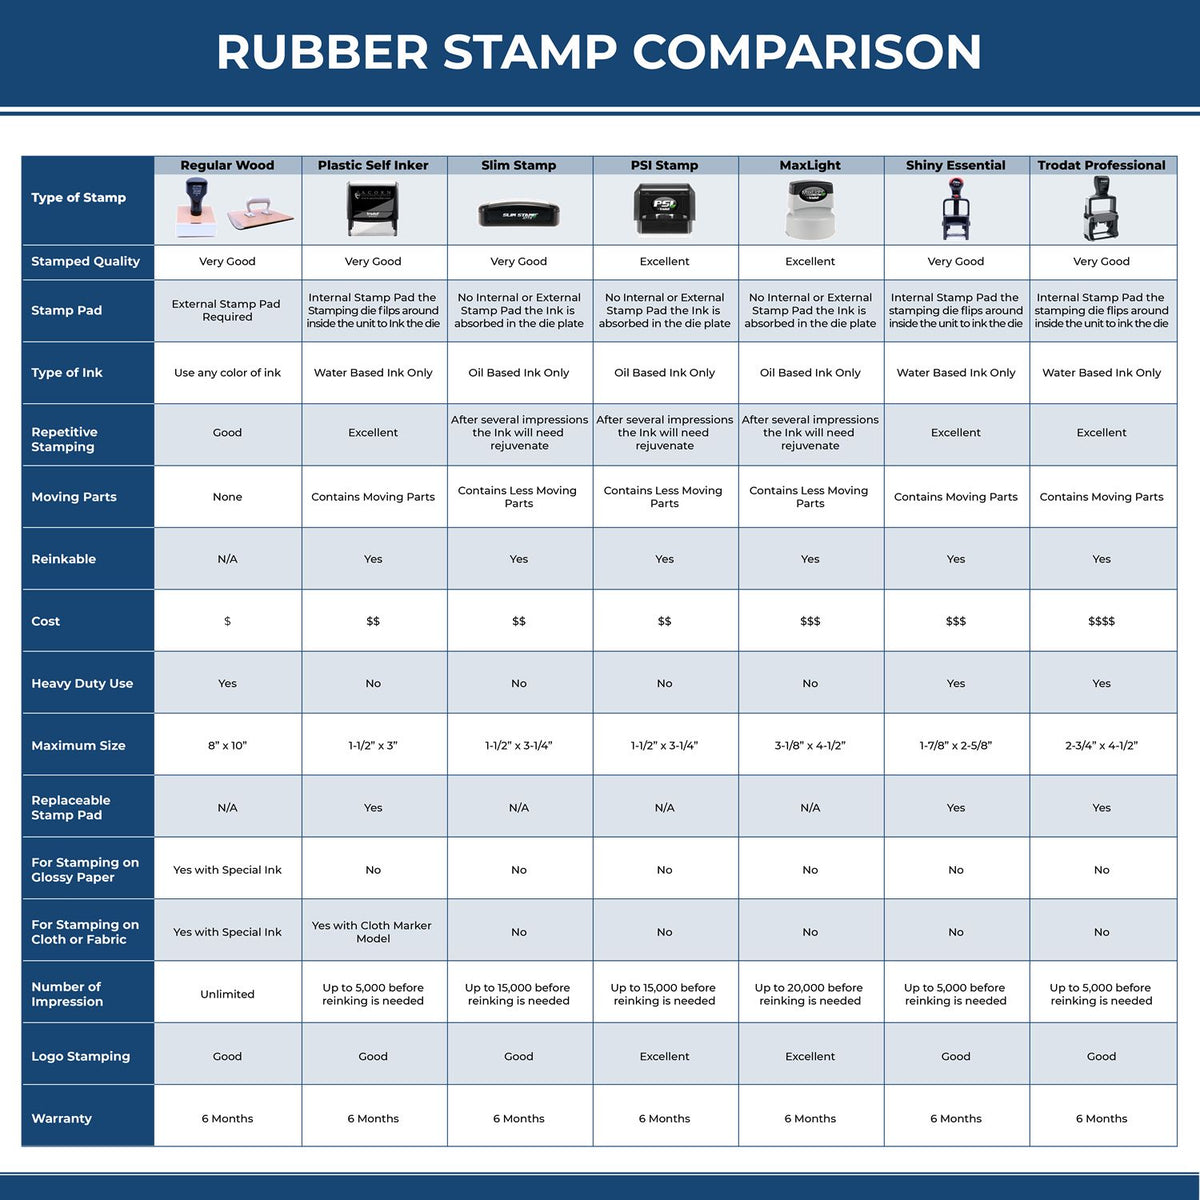 Large Self Inking Need To Improve Listening Stamp 4684S Rubber Stamp Comparison